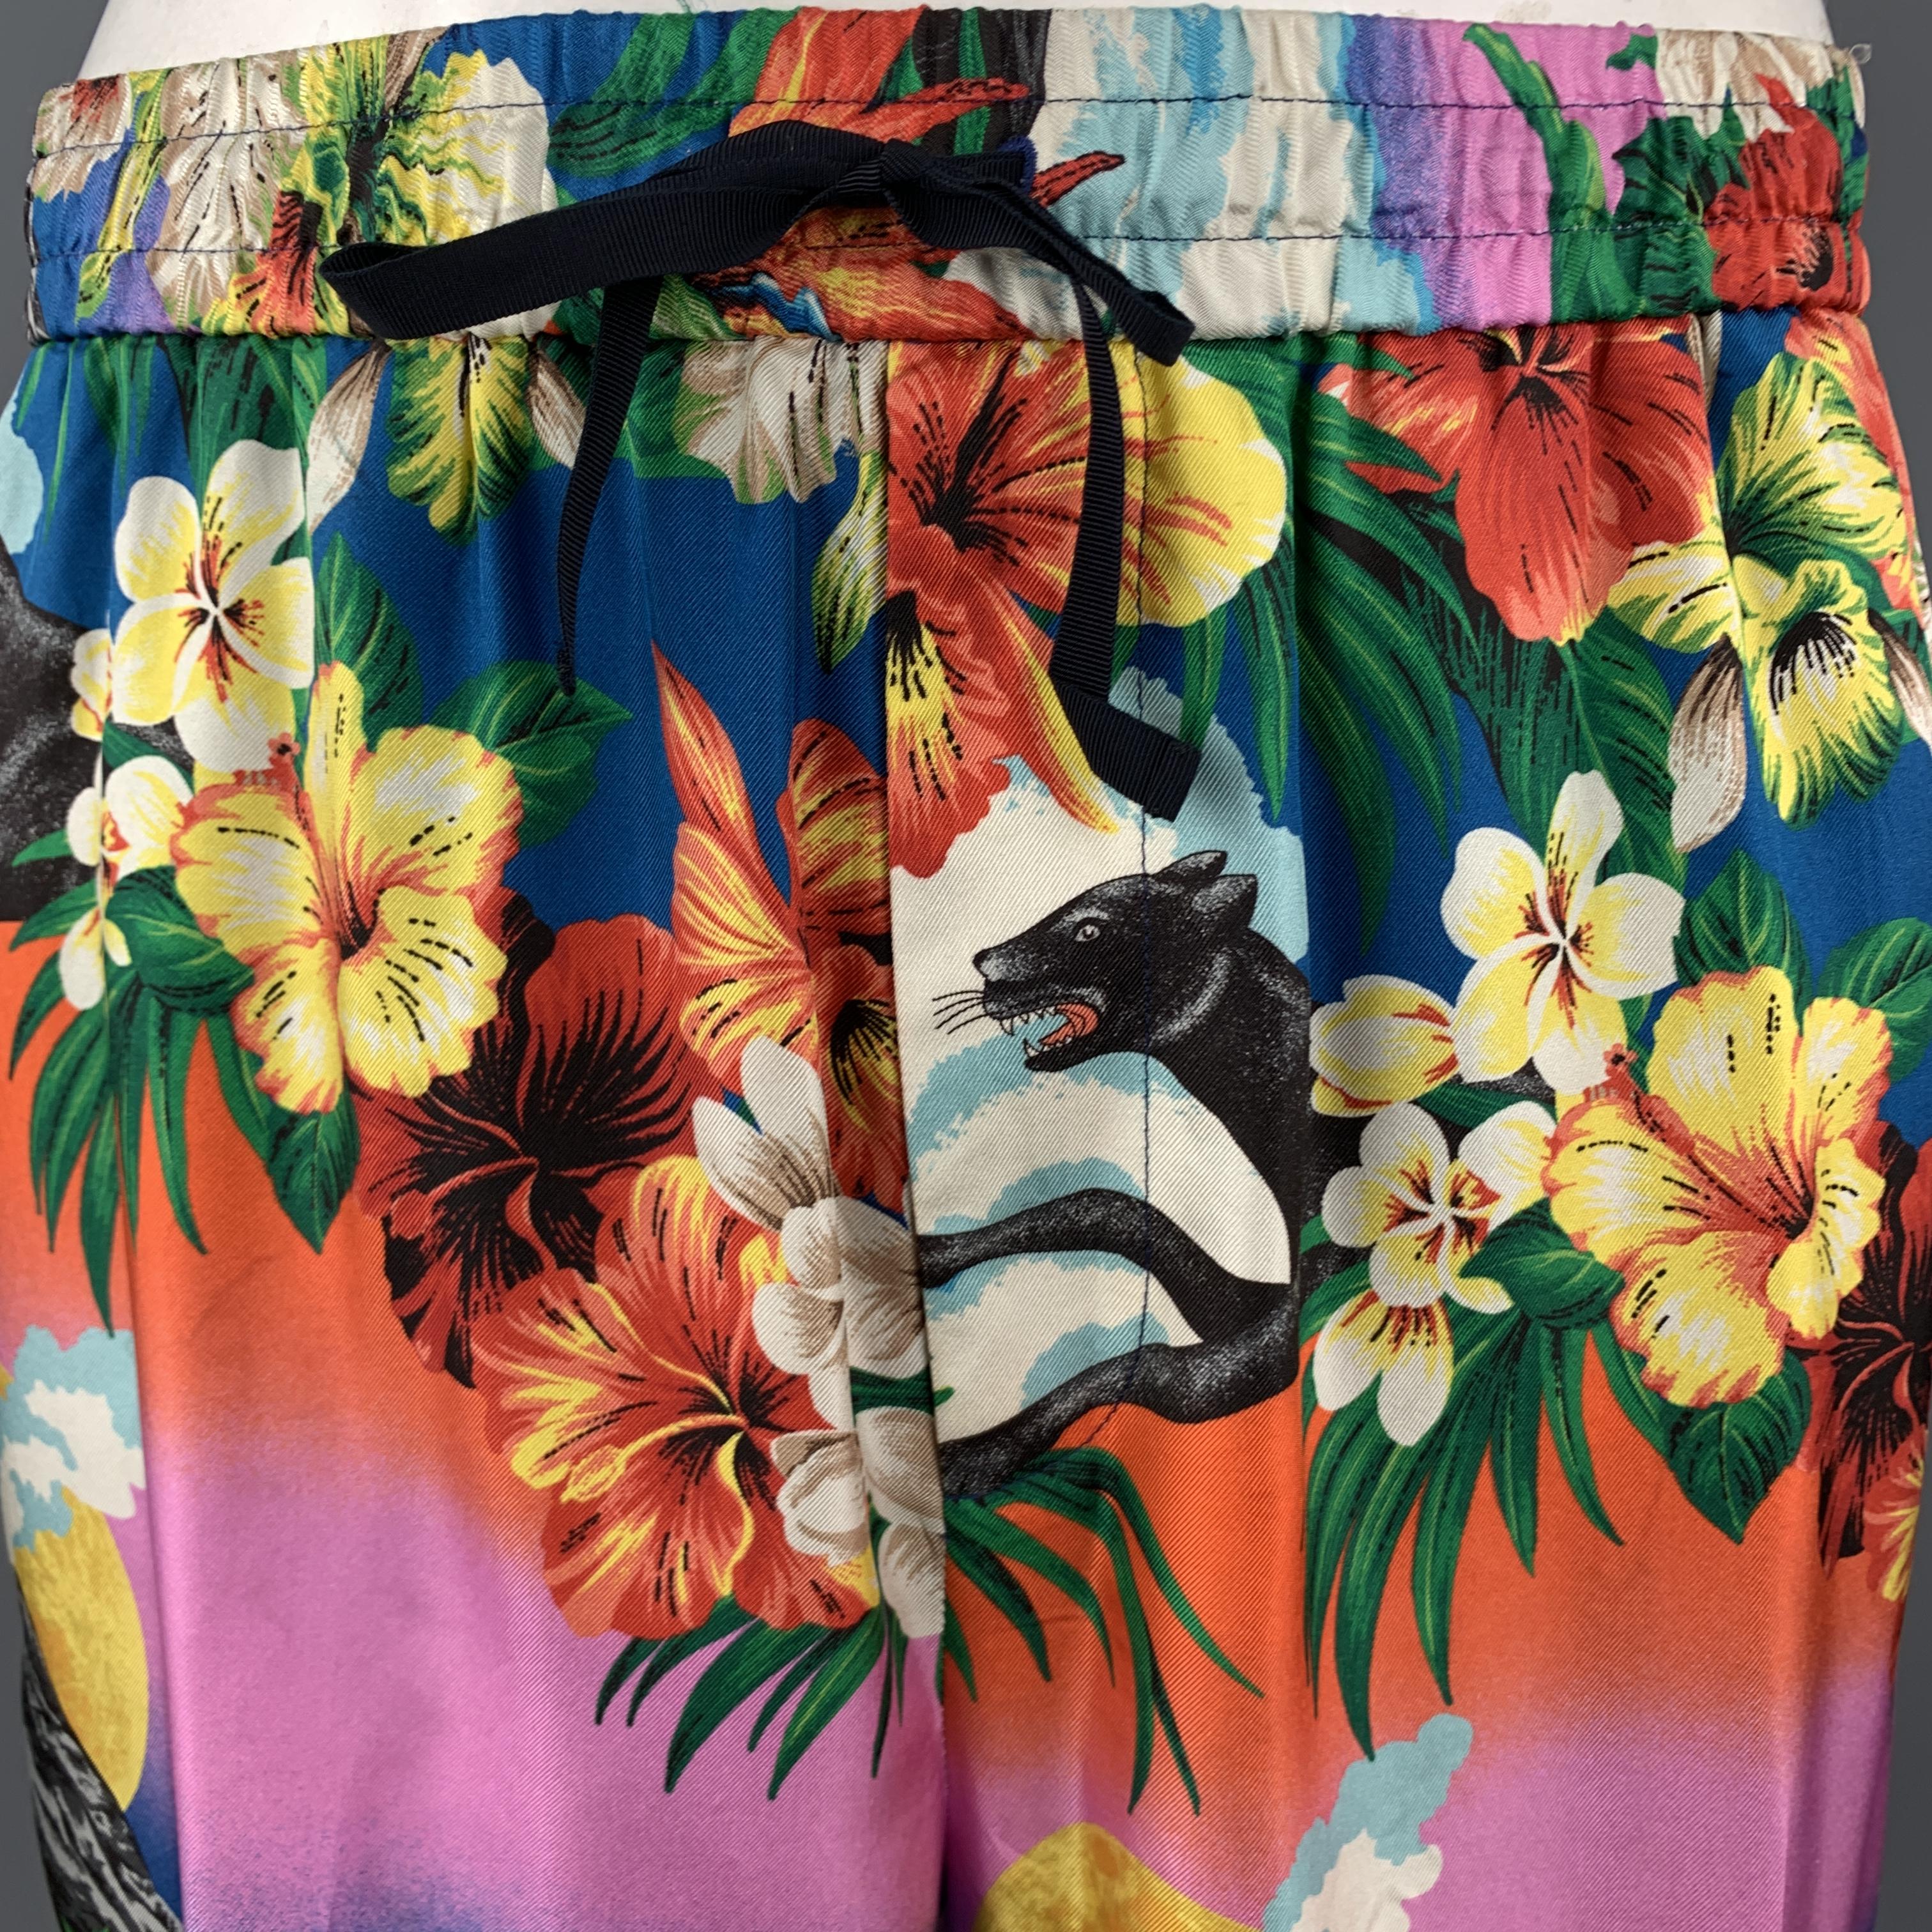 GUCCI shorts come in silk twill with a colorful floral, panther, volcano print , detailed with a drawstring, elactis waistband, and navy, red, and green striped ribbon trim. Light discolorations throughout. As-is. Matching shirt sold separately.